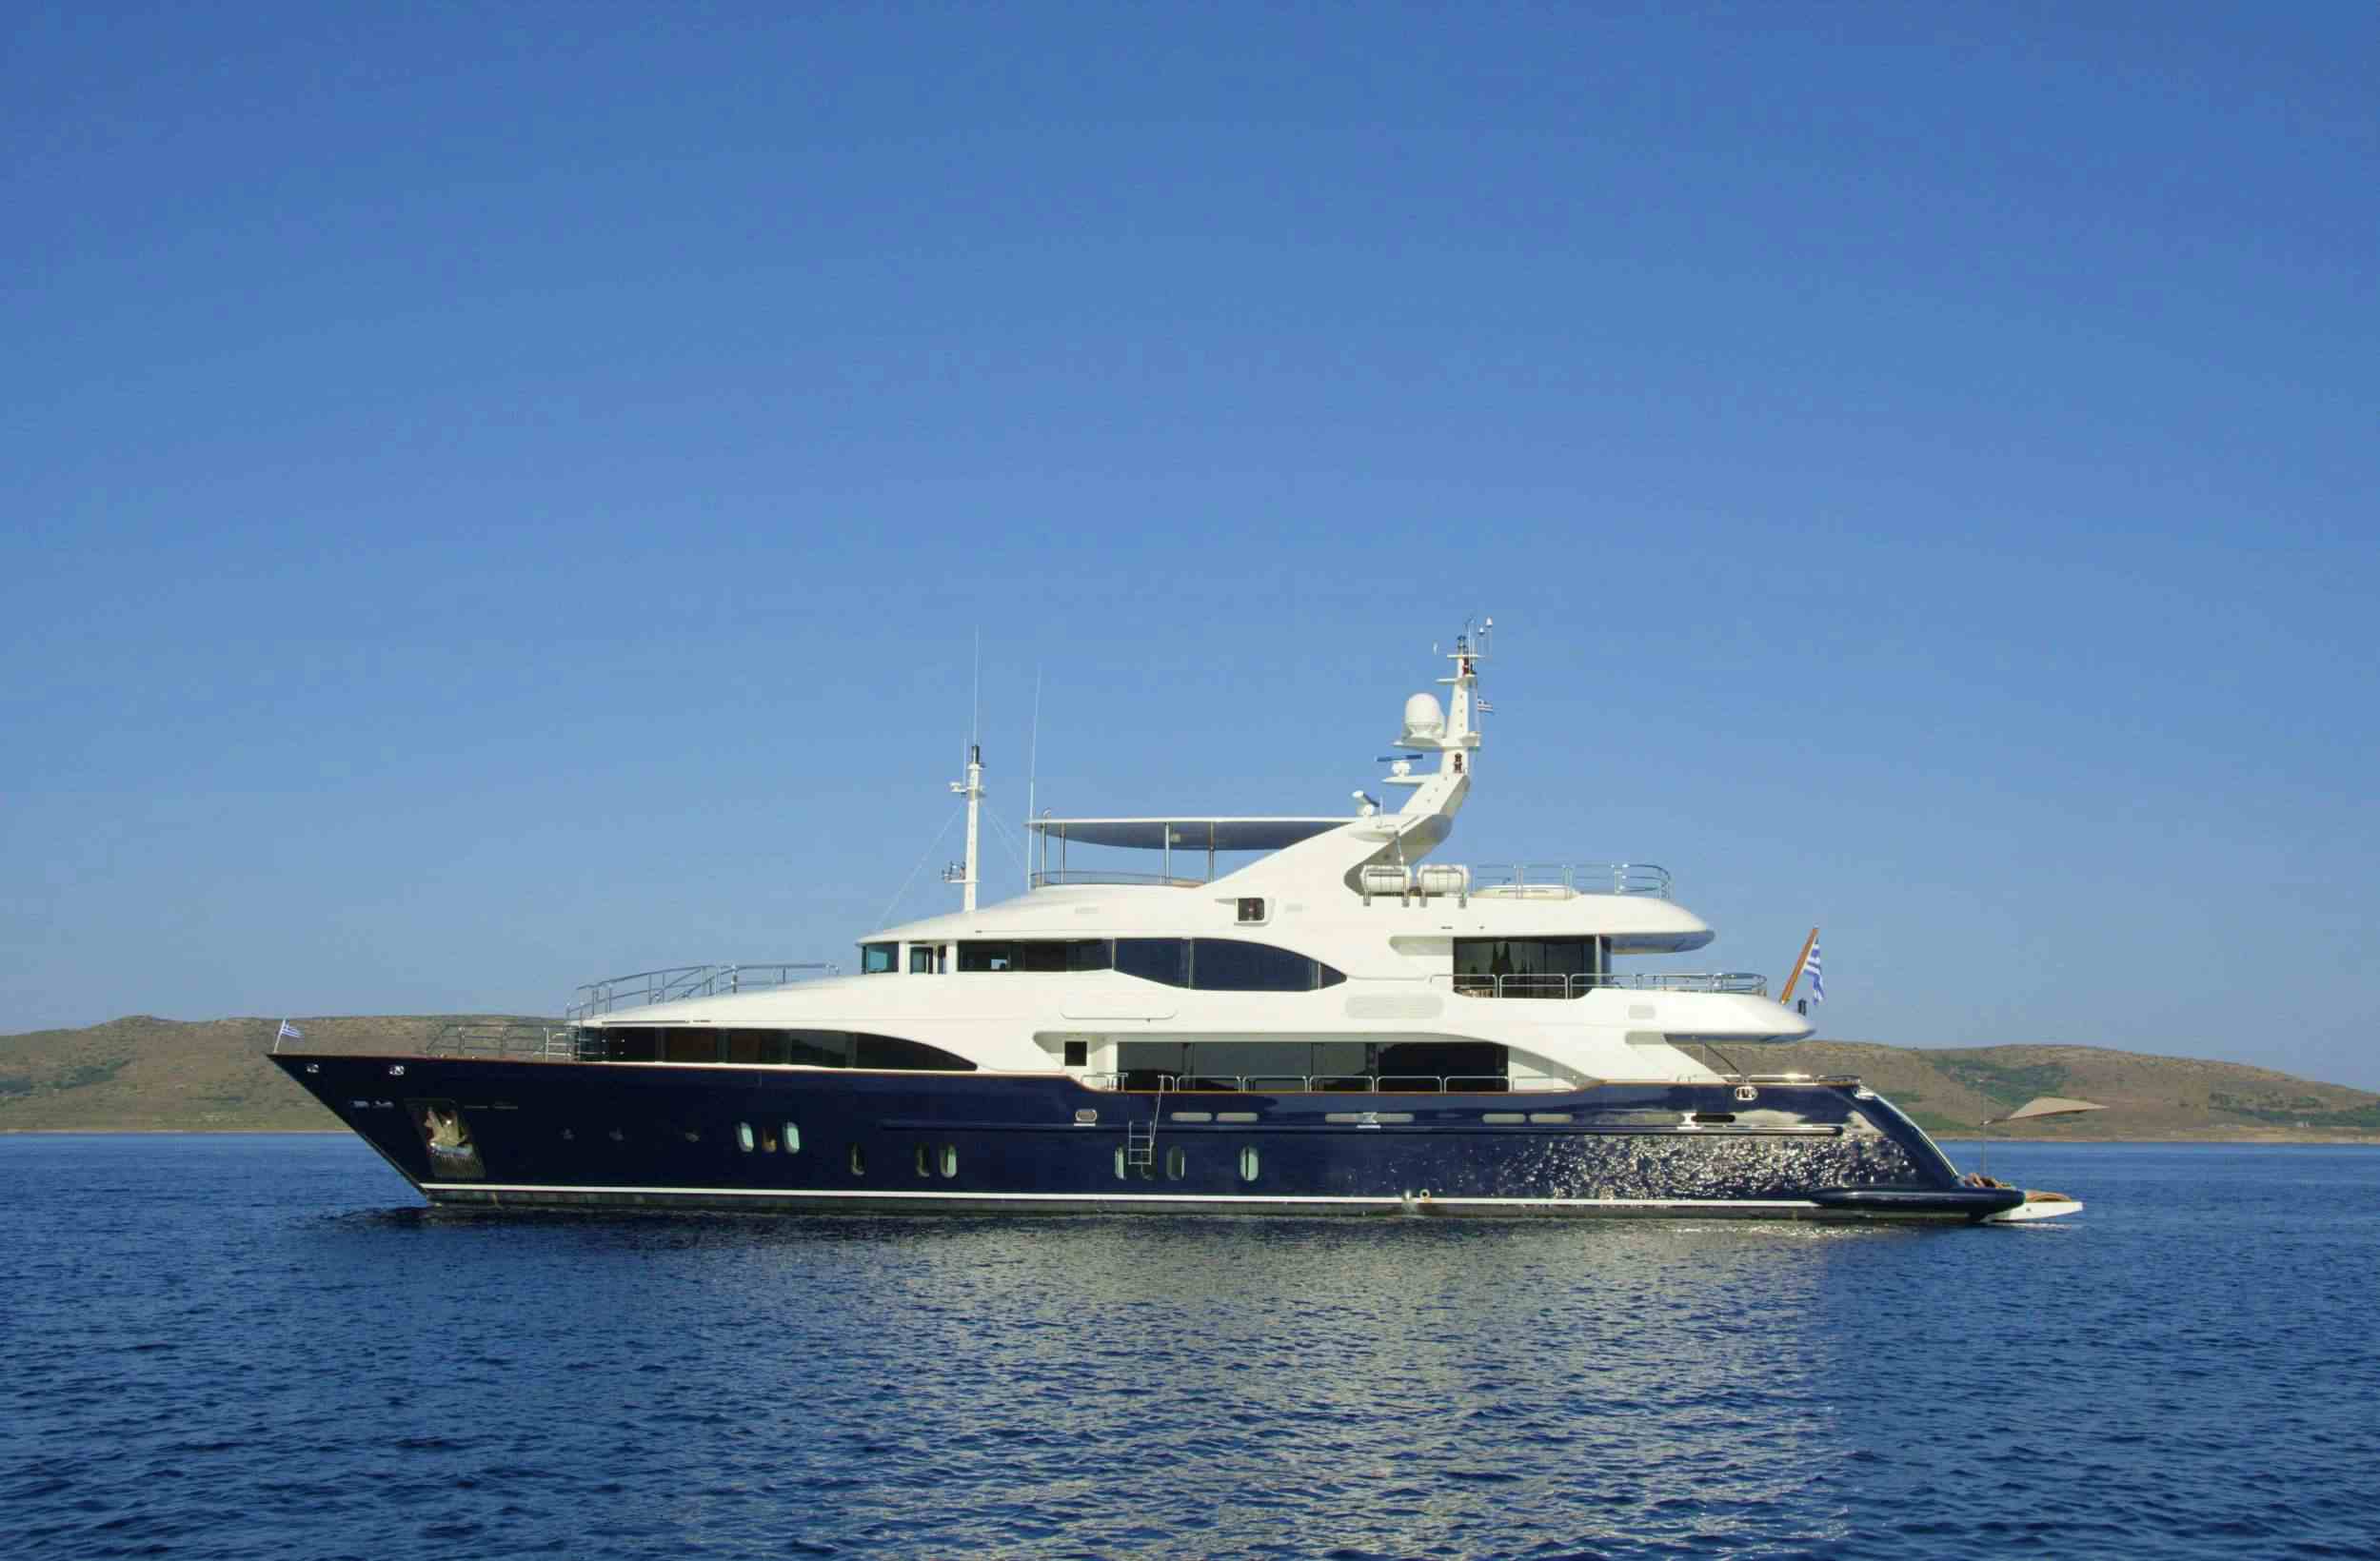 GRANDE AMORE - Yacht Charter Malaysia & Boat hire in Summer: W. Med -Naples/Sicily, Greece, W. Med -Riviera/Cors/Sard., Turkey, W. Med - Spain/Balearics, Croatia | Winter: Indian Ocean and SE Asia, Red Sea, United Arab Emirates 1